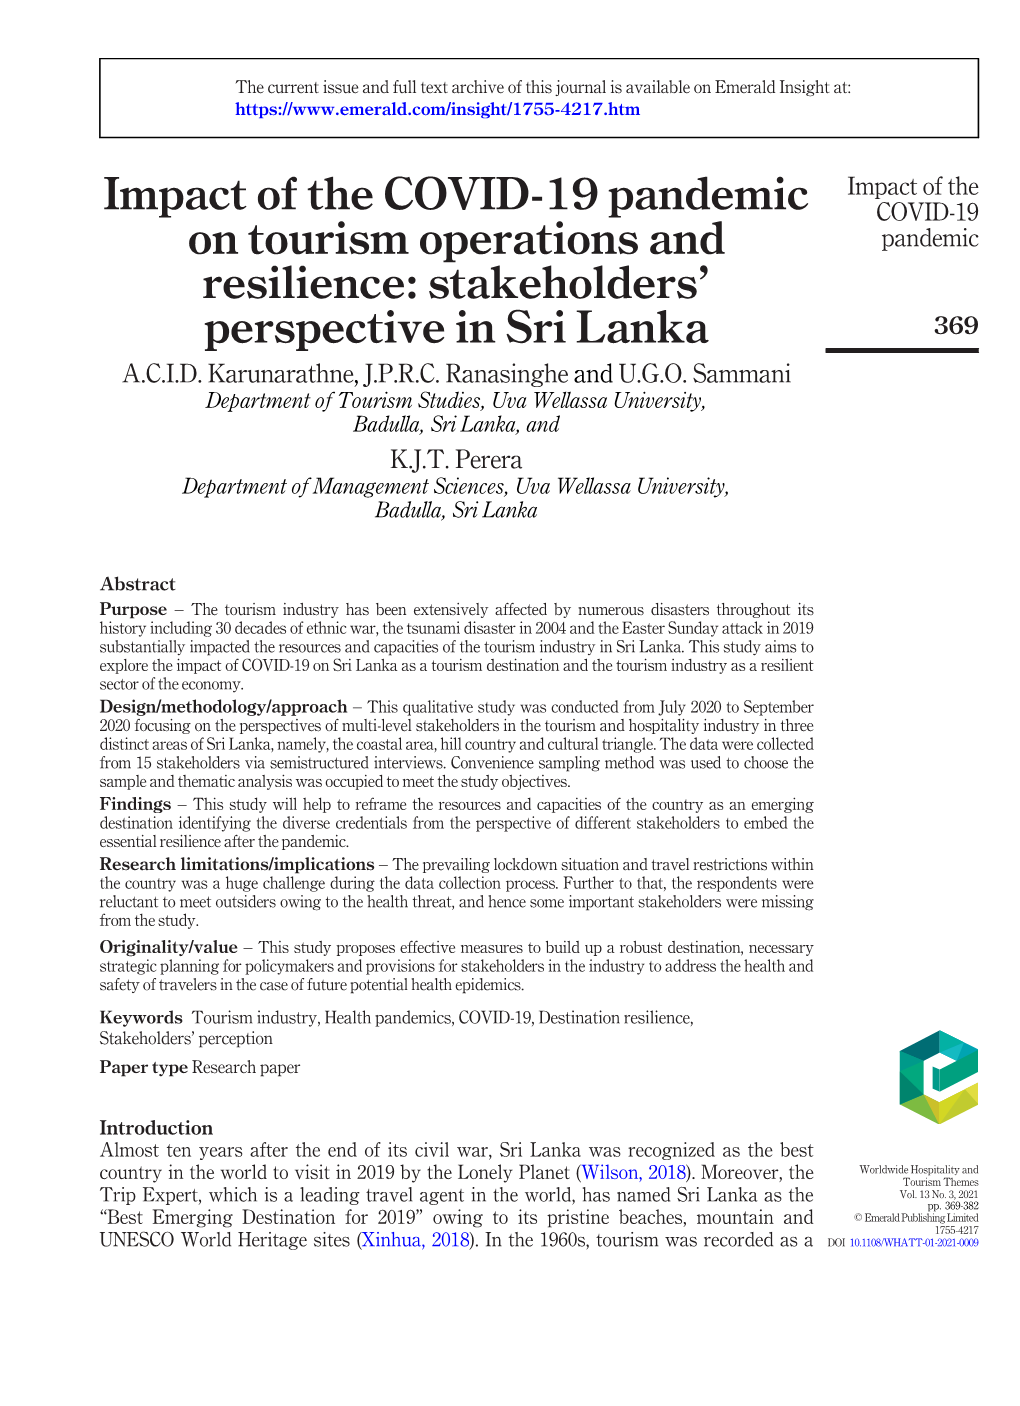 Impact of the COVID-19 Pandemic on Tourism Operations and Resilience